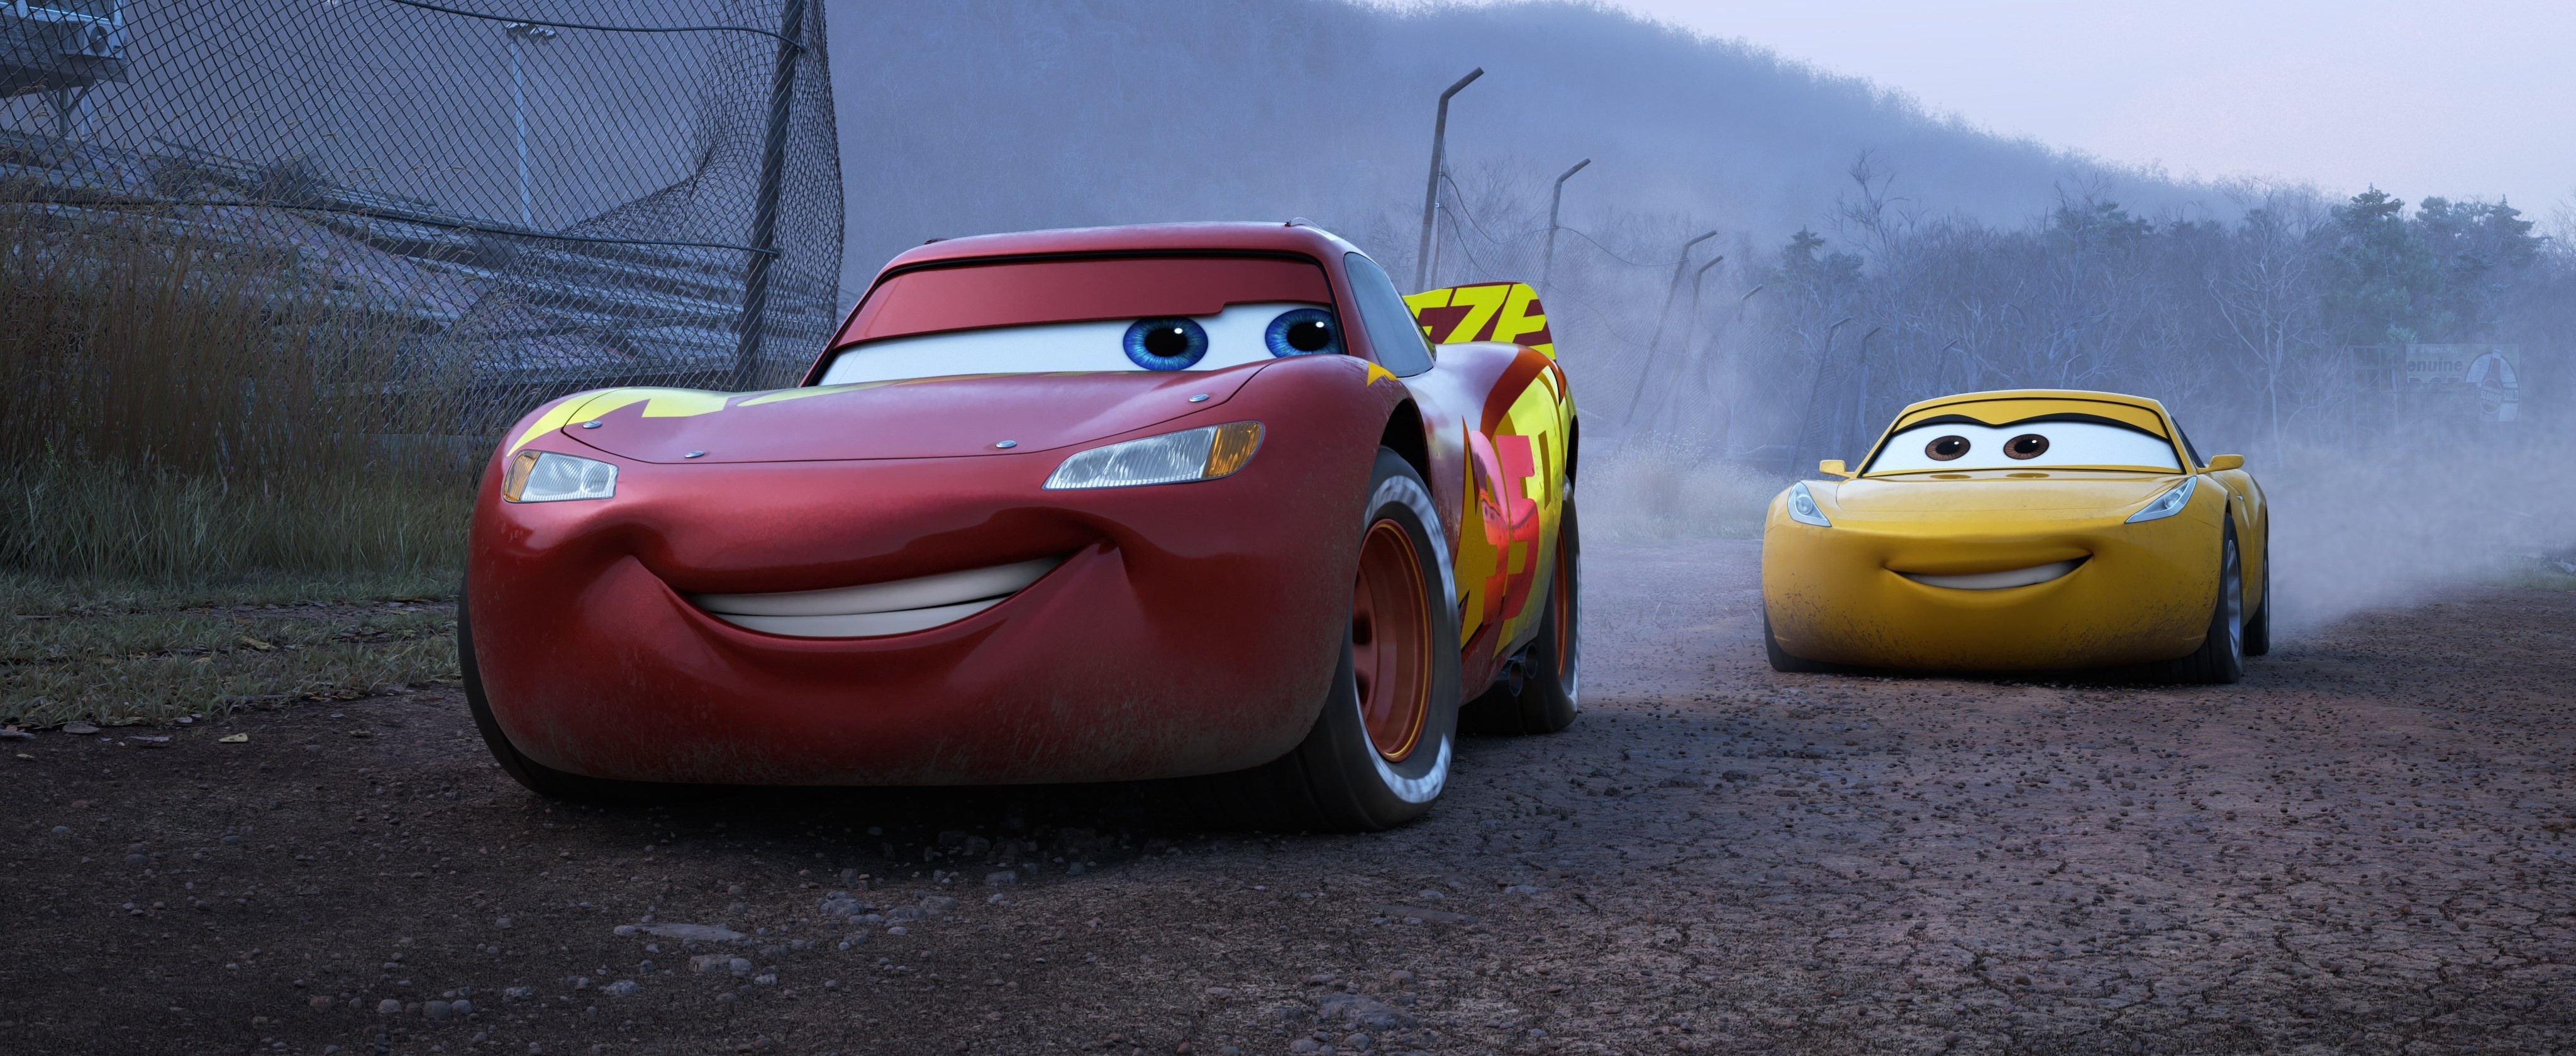 Free Images  Lightning Mcqueen